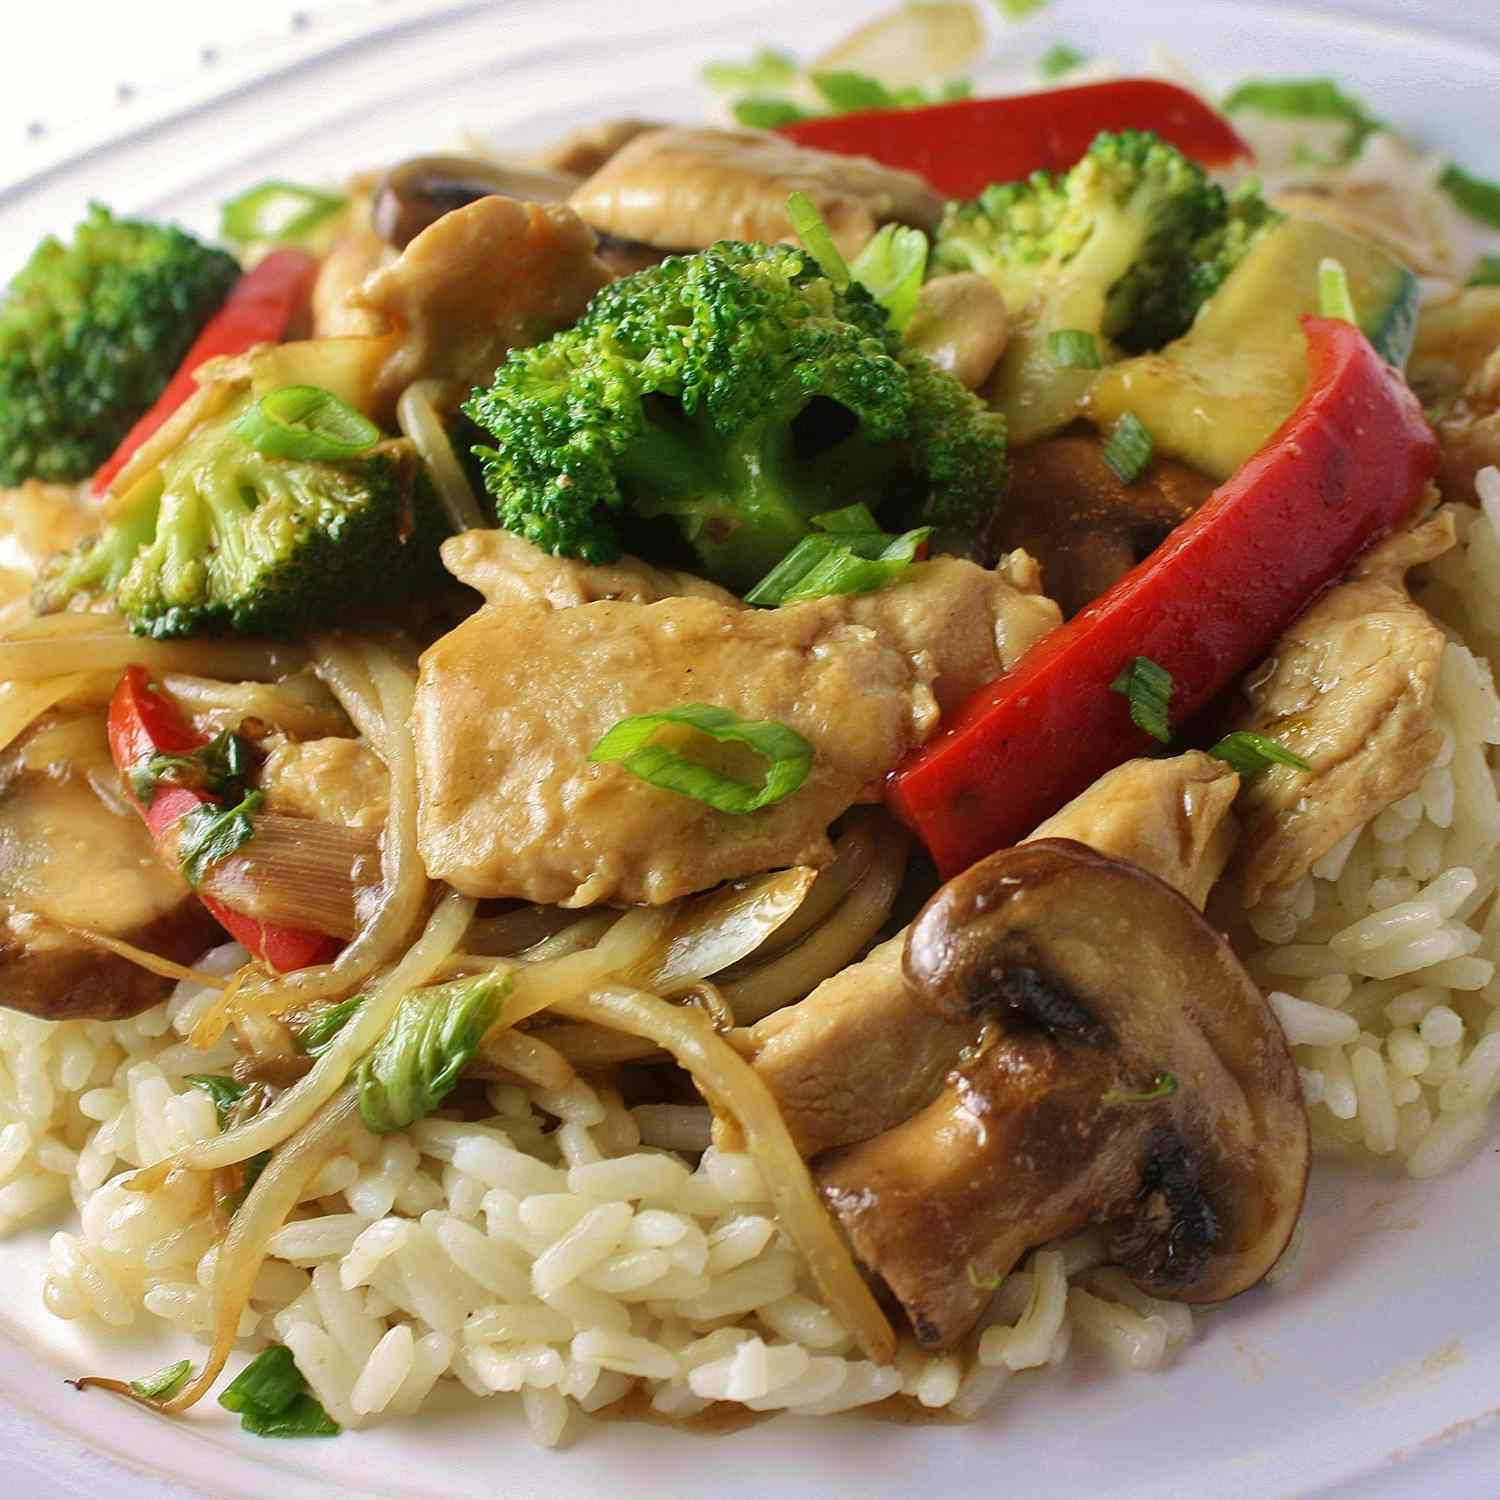 a colorful stir-fry of chicken breast strips, red bell pepper, broccoli florets, and sliced mushrooms on white rice